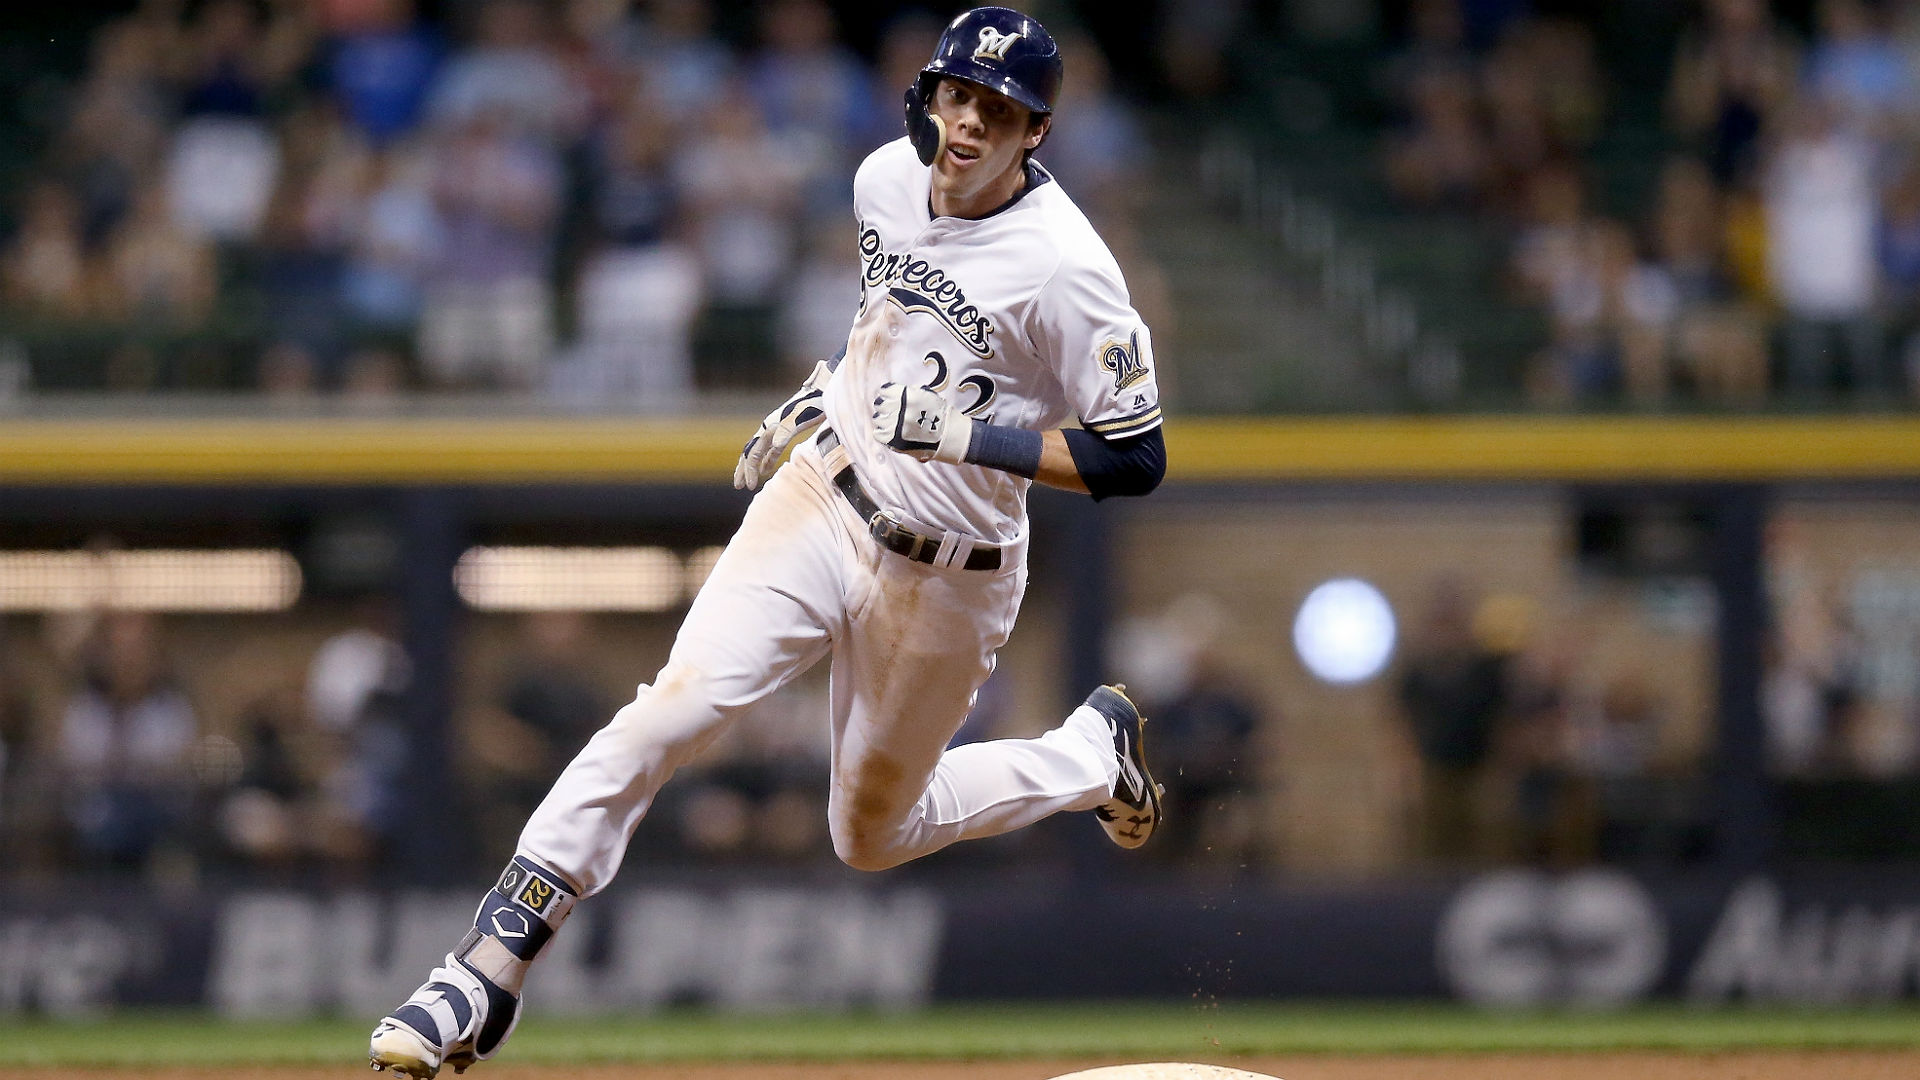 Christian Yelich Open to Contract Extension Talks With Brewers: “I love it here”